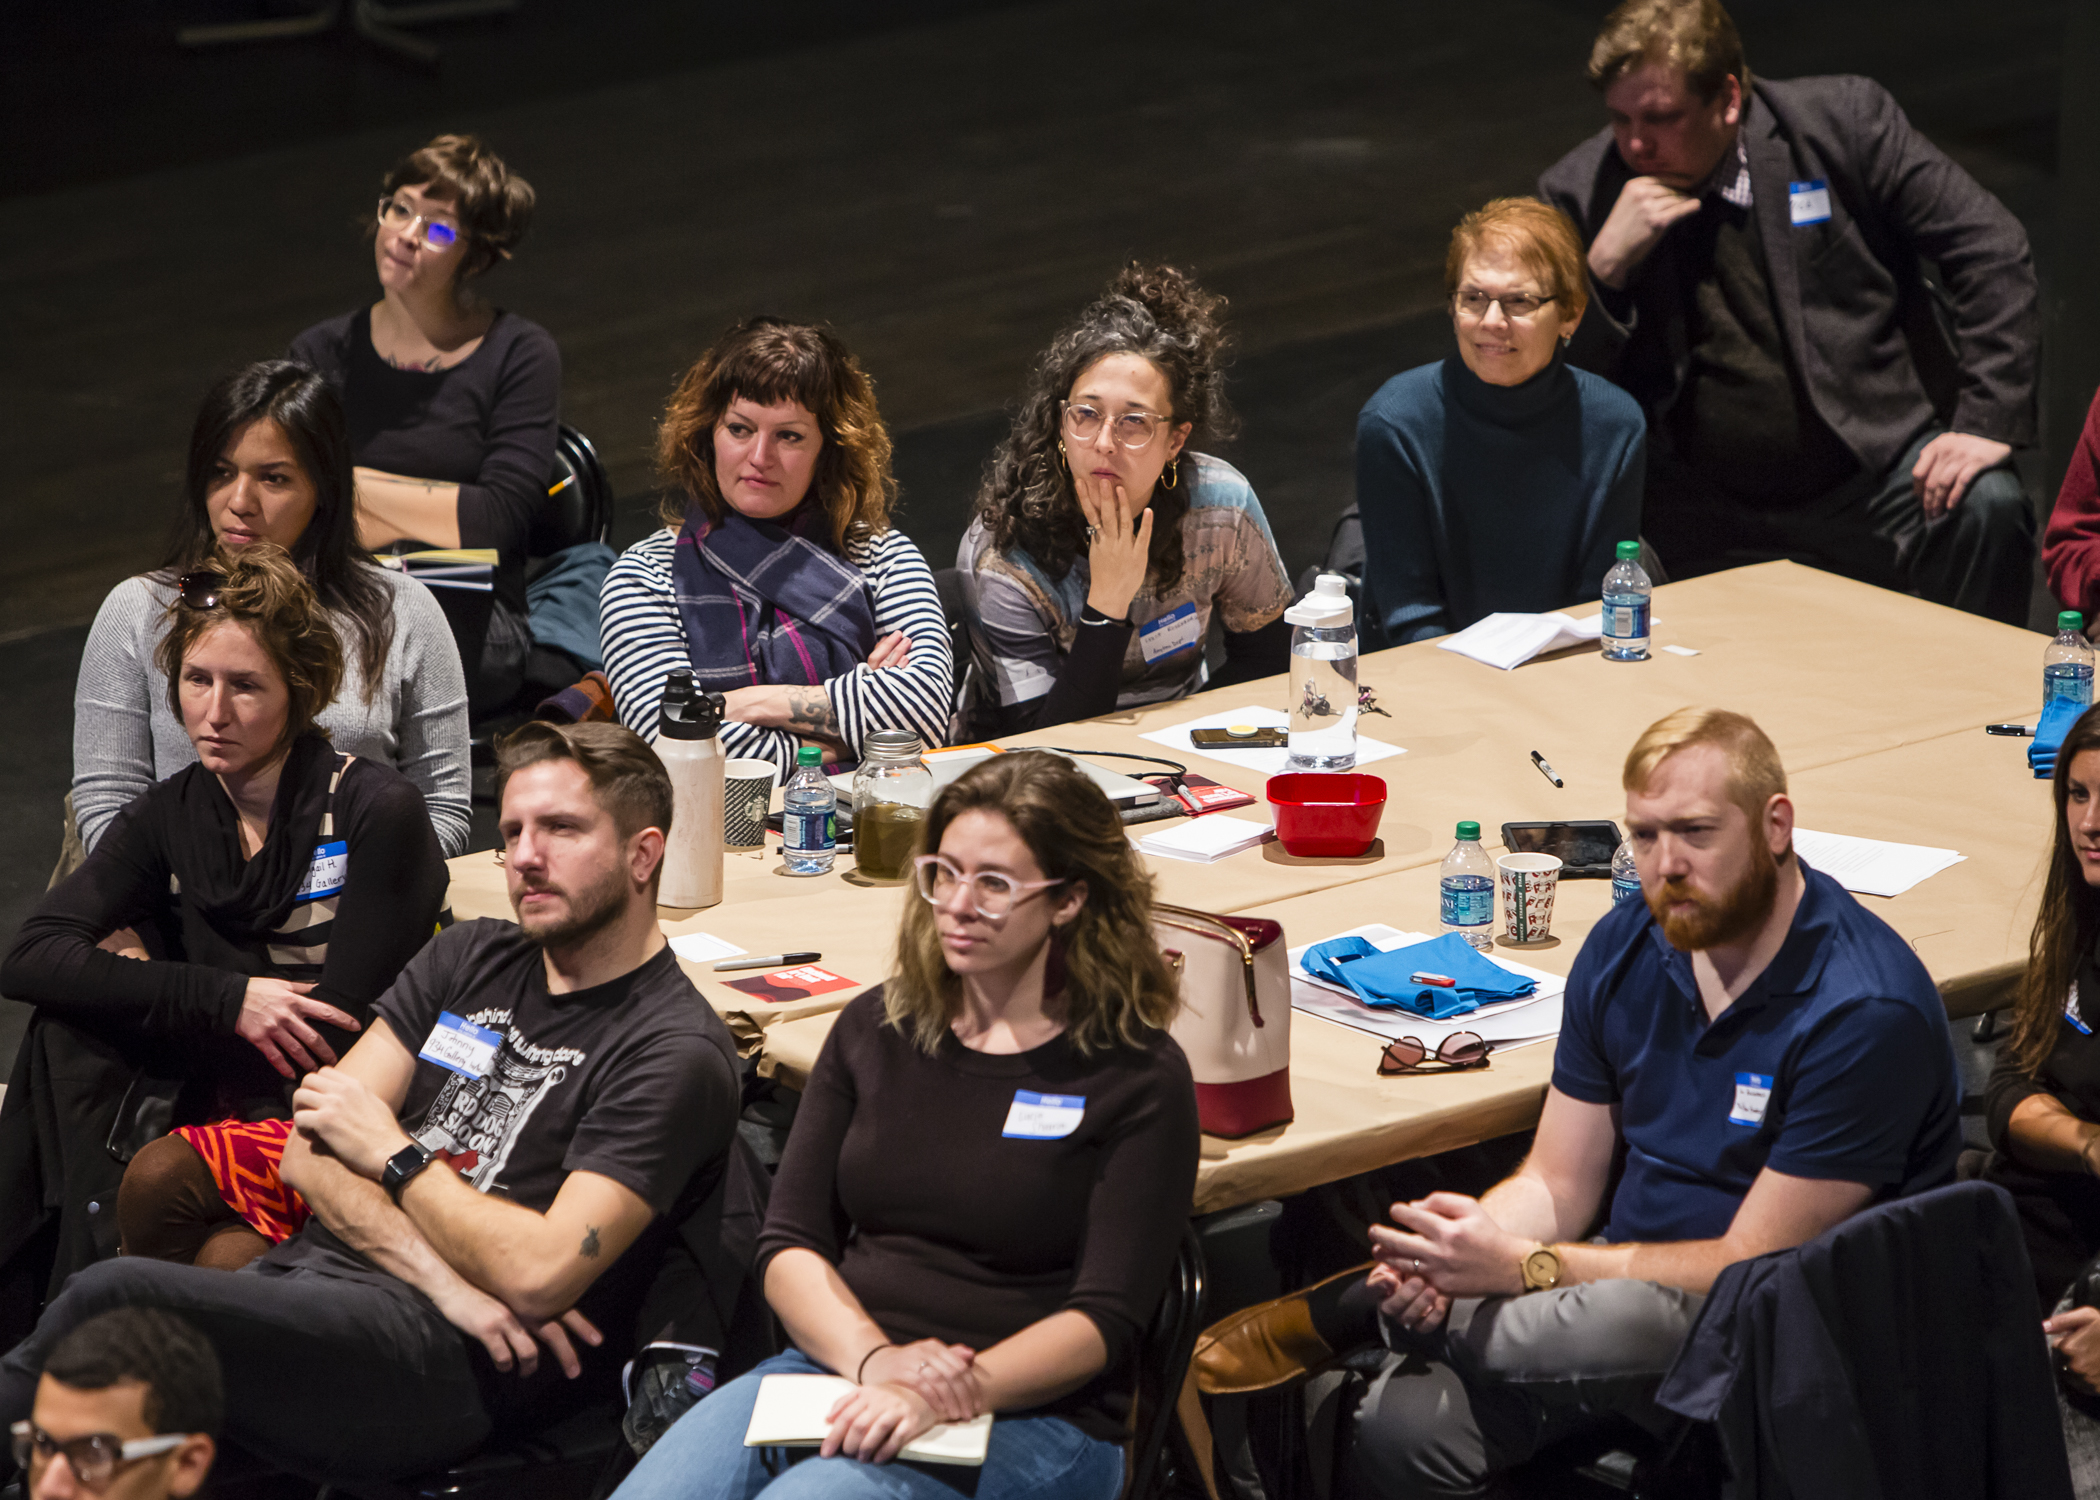 A table of participants at the November 16, 2019 event hear here: artist-run spaces and collectives in Ohio, in the Performance Space at the Wexner Center for the Arts. Photo: Katie Spengler Gentry